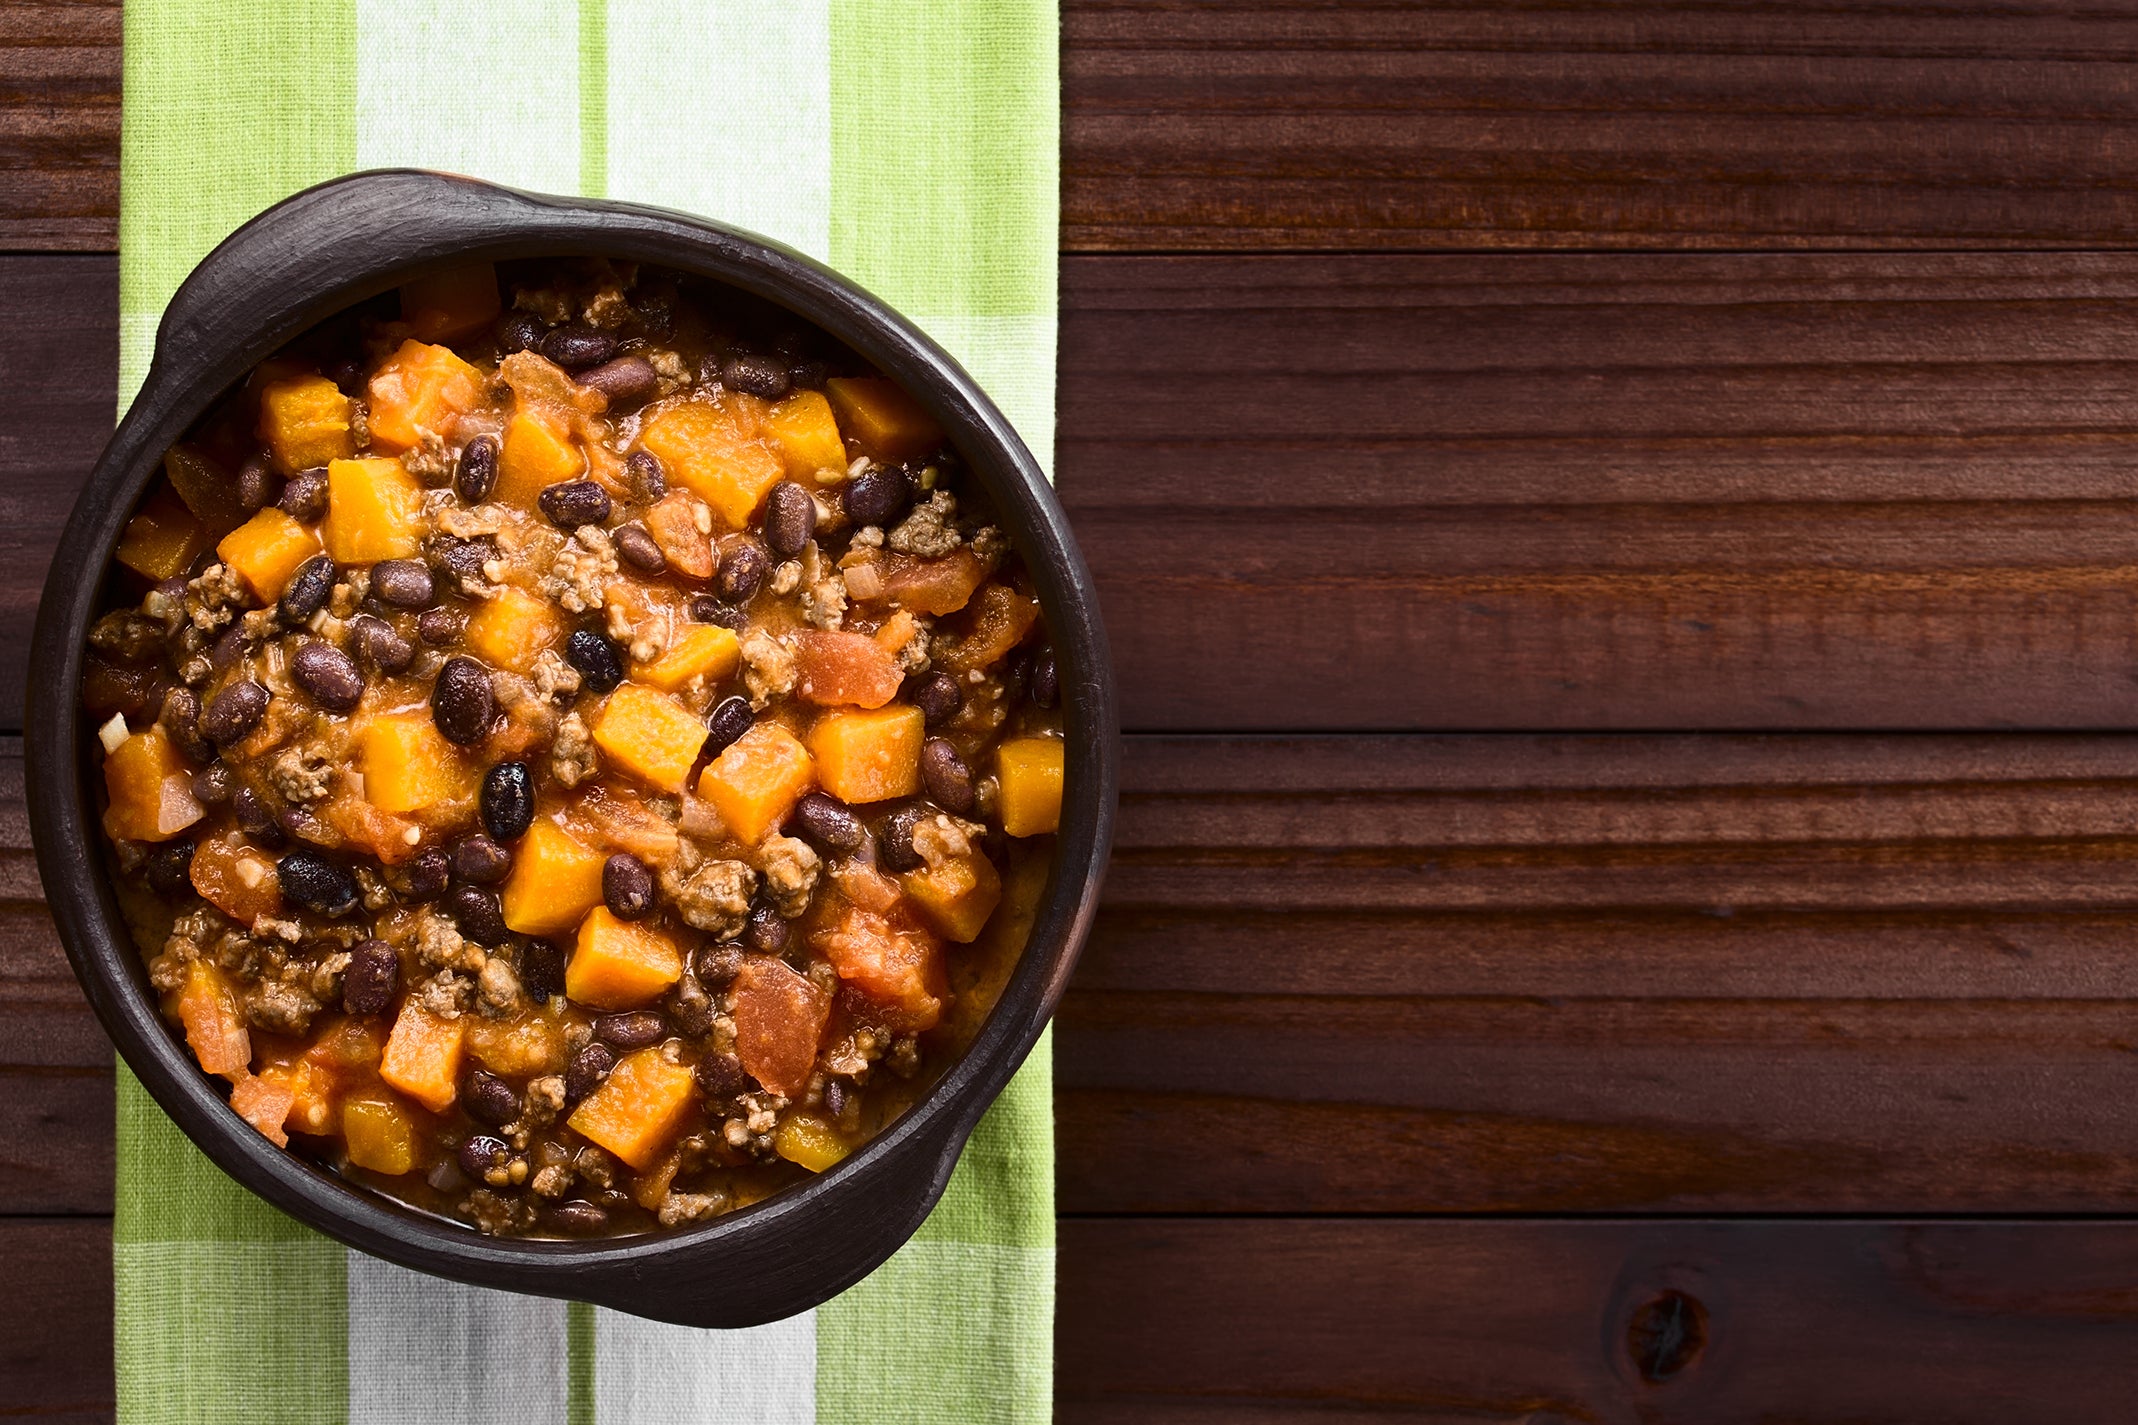 Vegetarian Chili is made with black beans, vegetables, and spices, such as cumin, chili powder, and paprika.